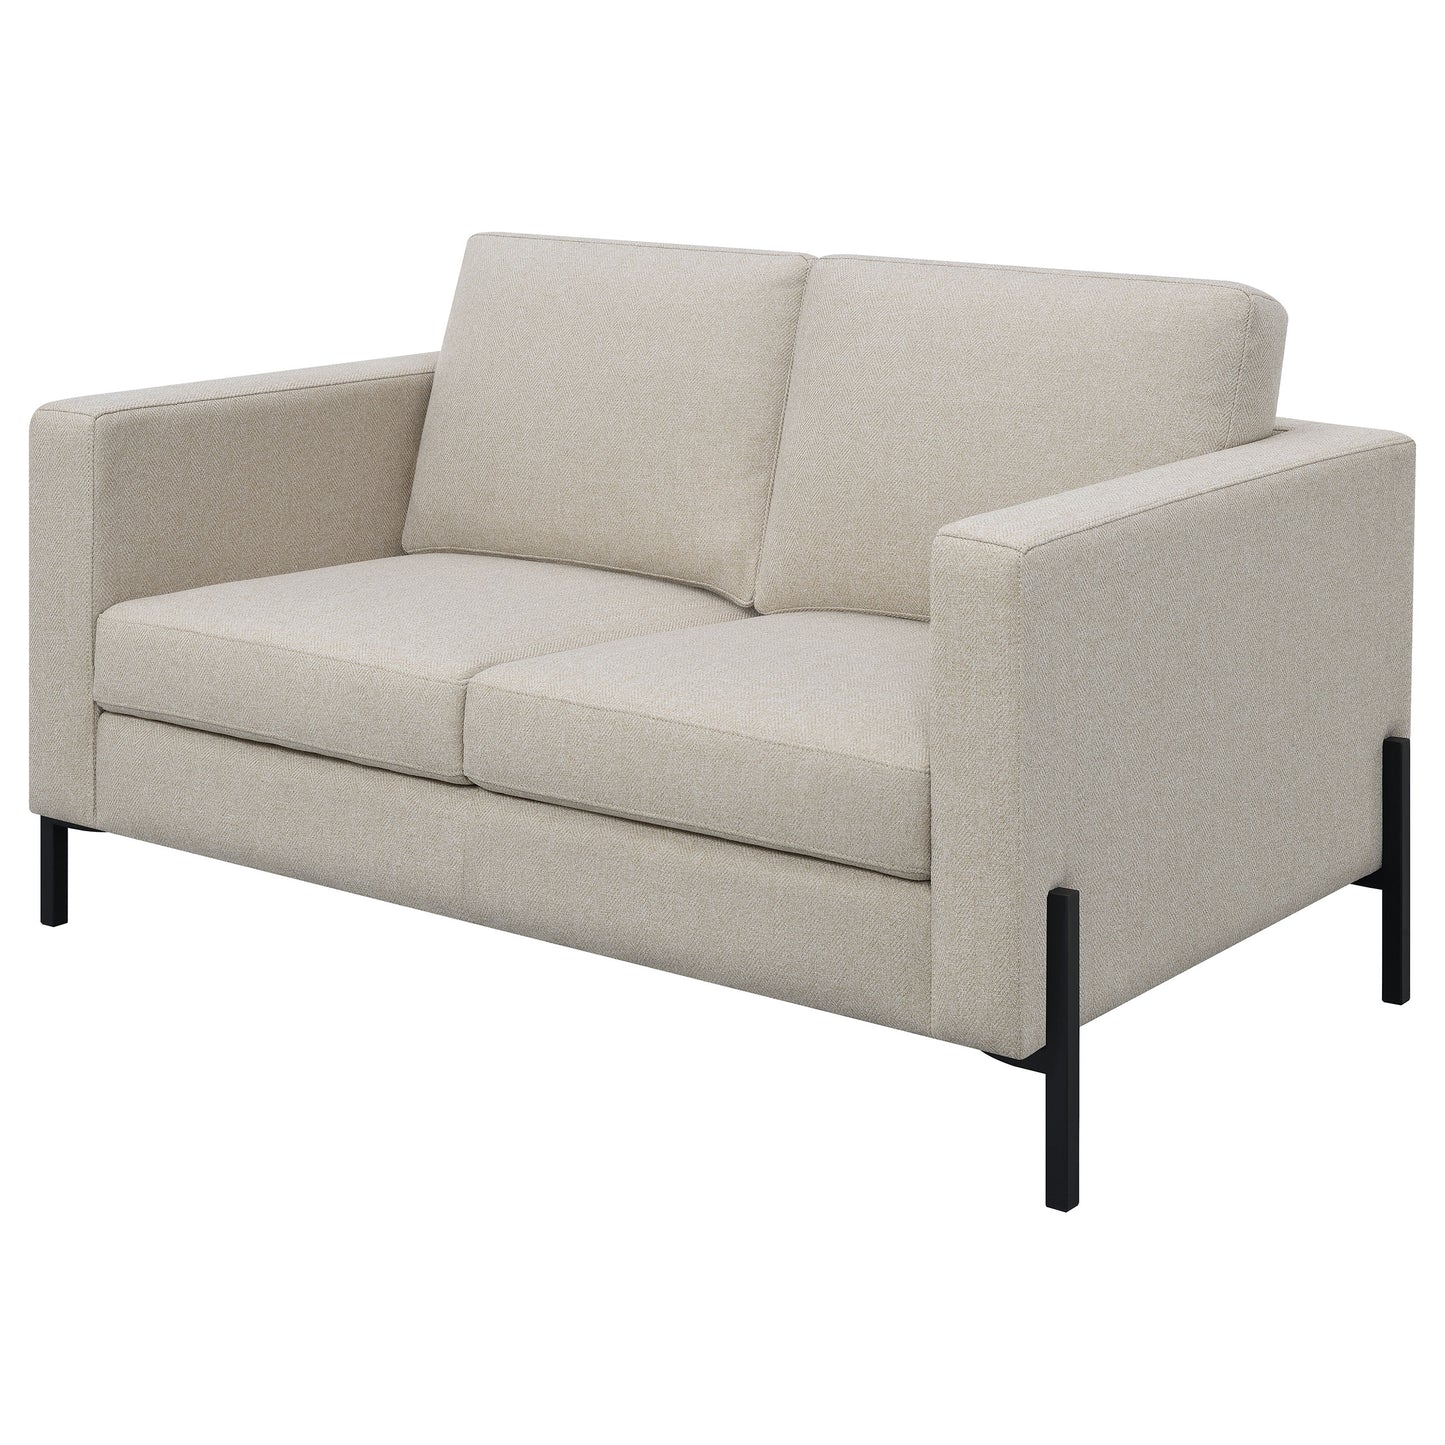 Tilly Upholstered Track Arms Loveseat Oatmeal